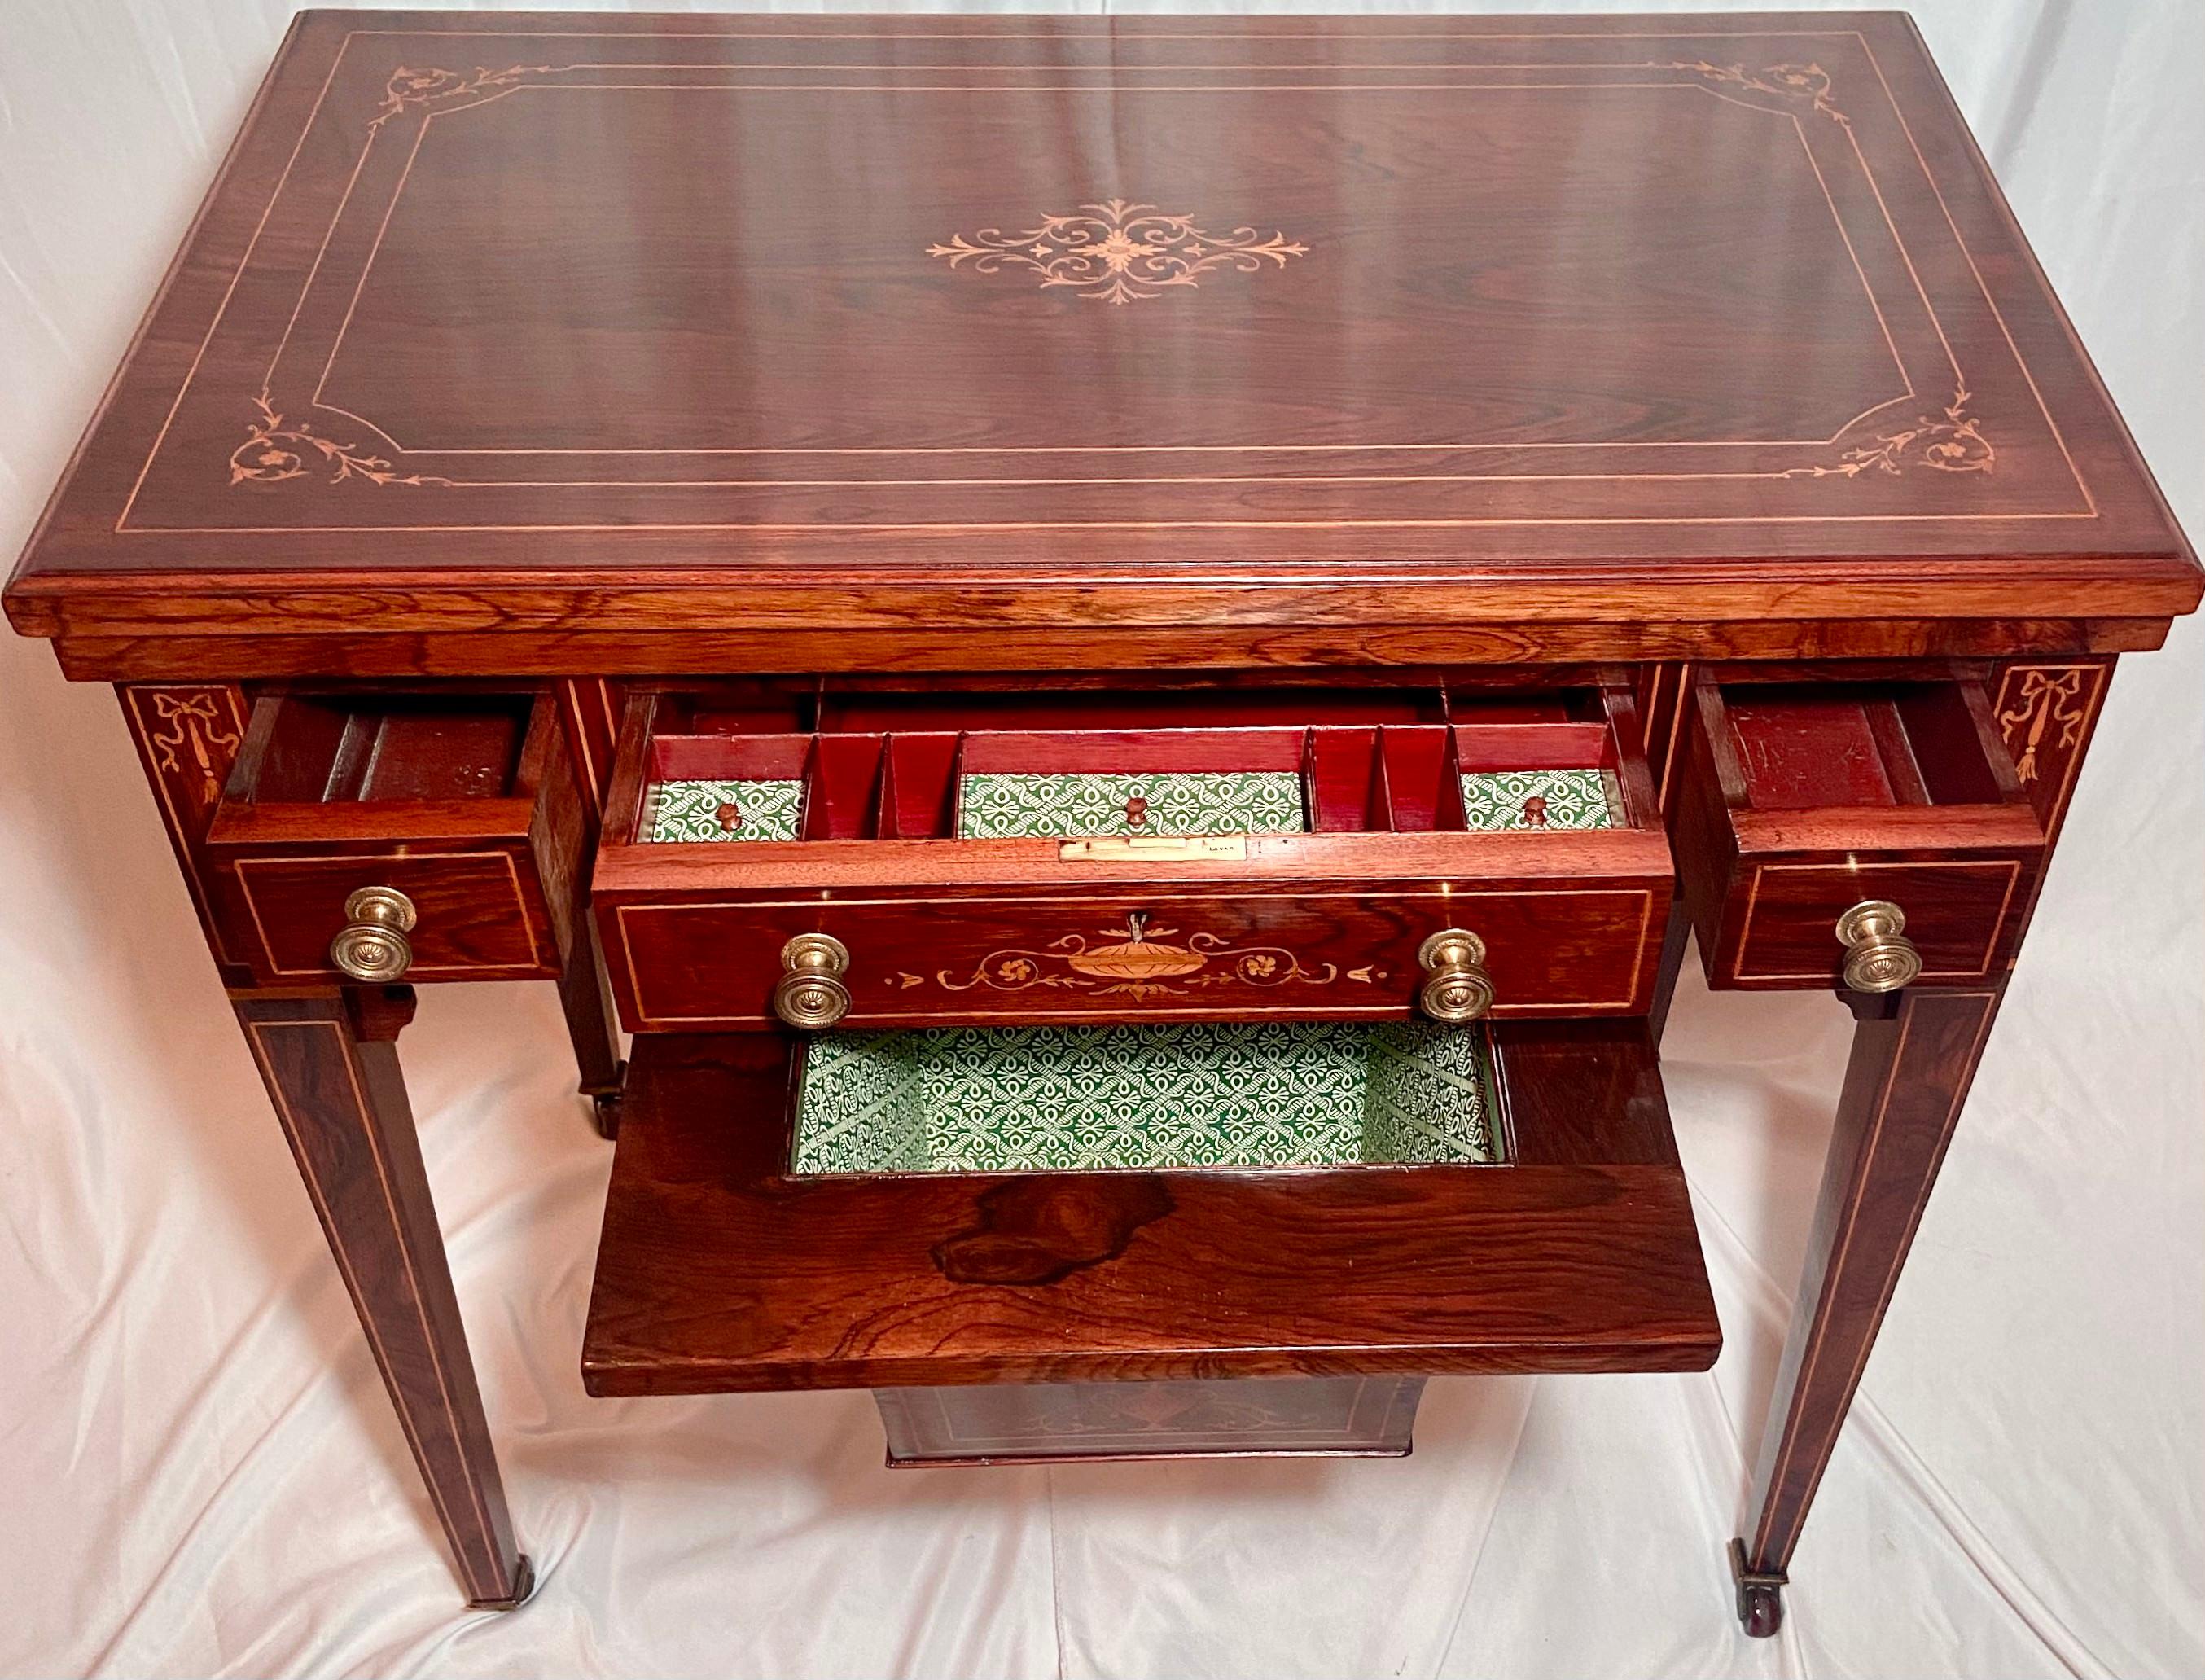 Superb quality antique English Victorian rosewood with inlay games table, Circa 1870-1880.